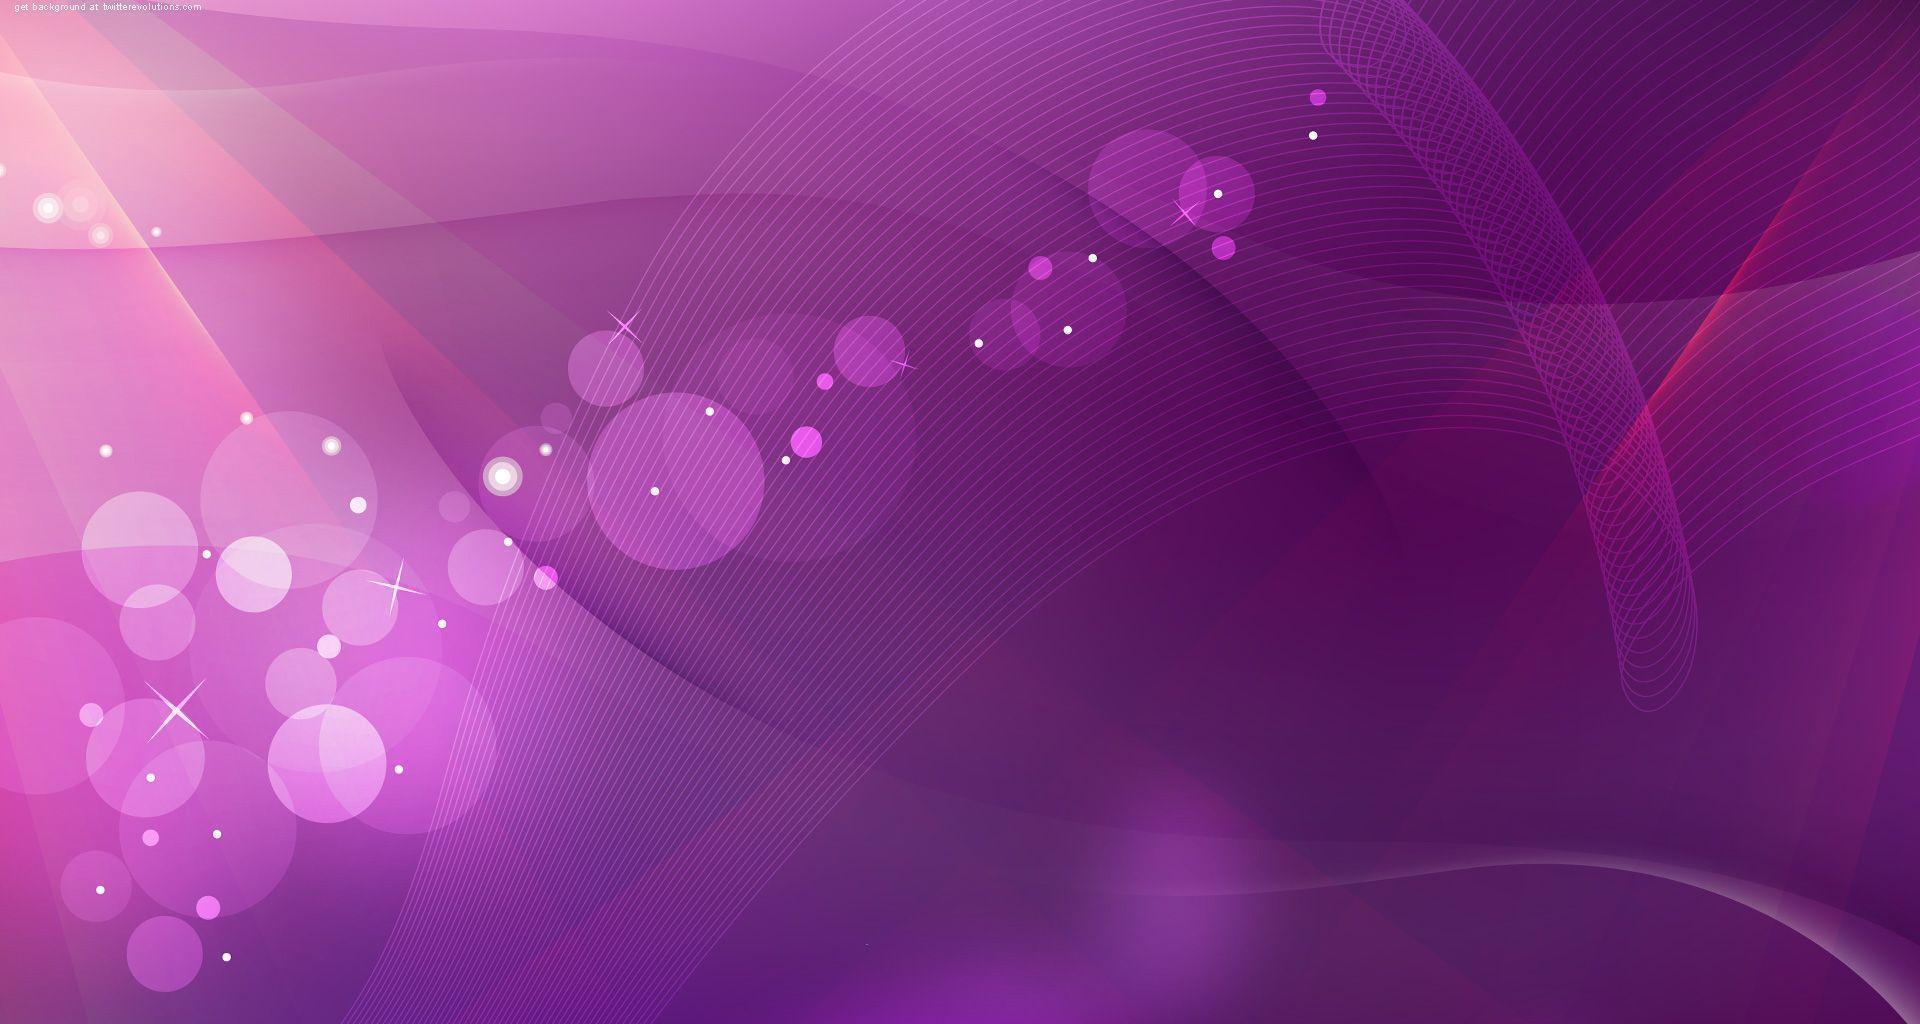 Pink dreams Twitter background. Twitter background